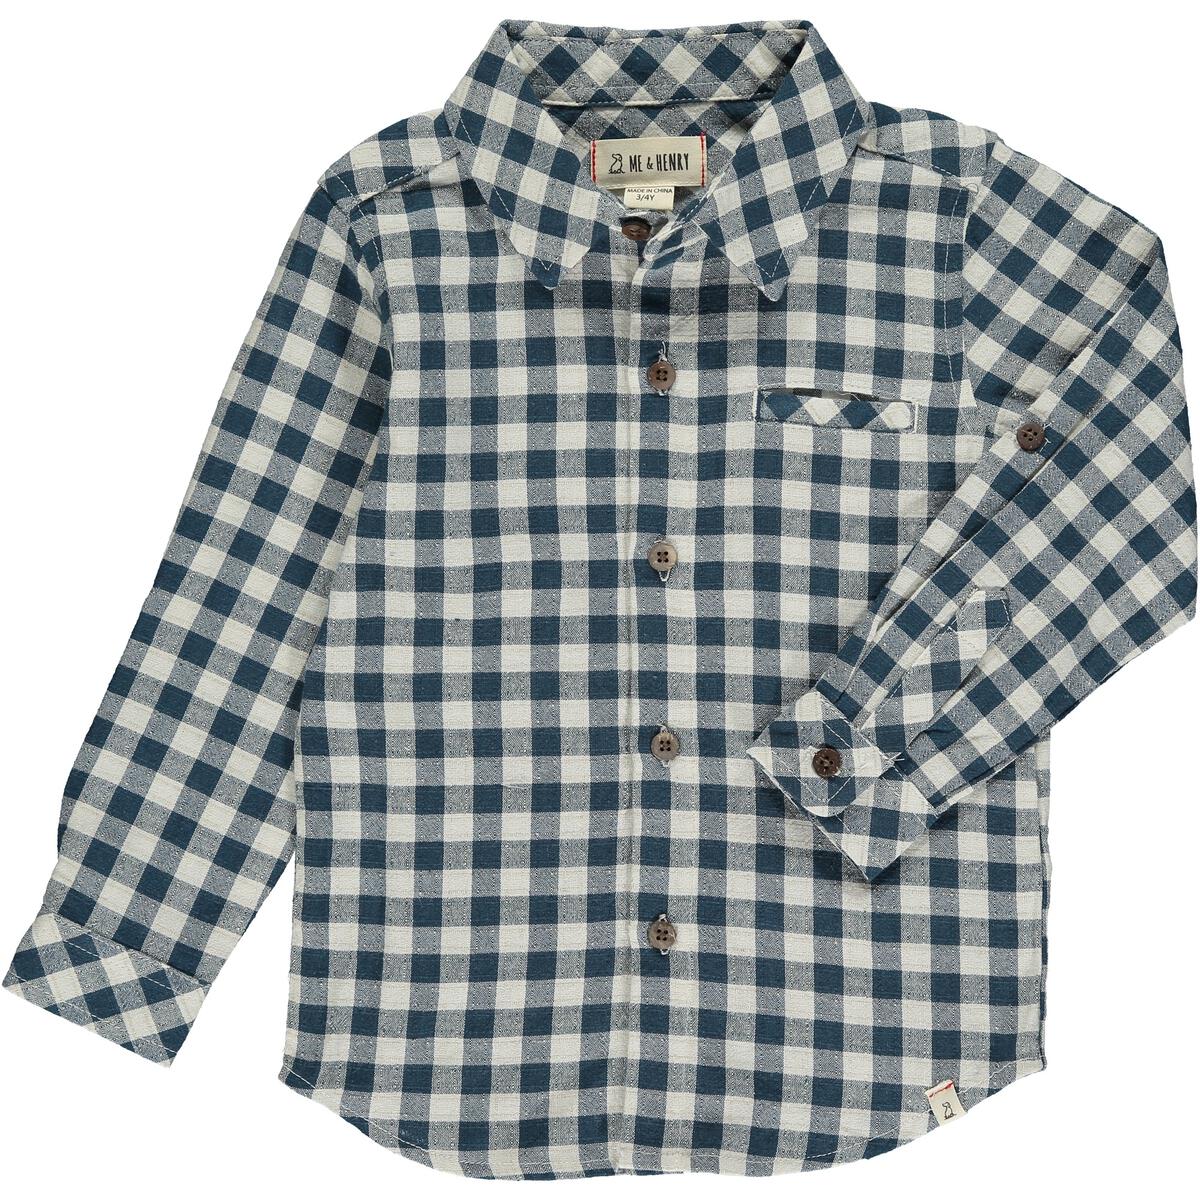 Me & Henry - Atwood Woven Shirt - Teal/White Plaid